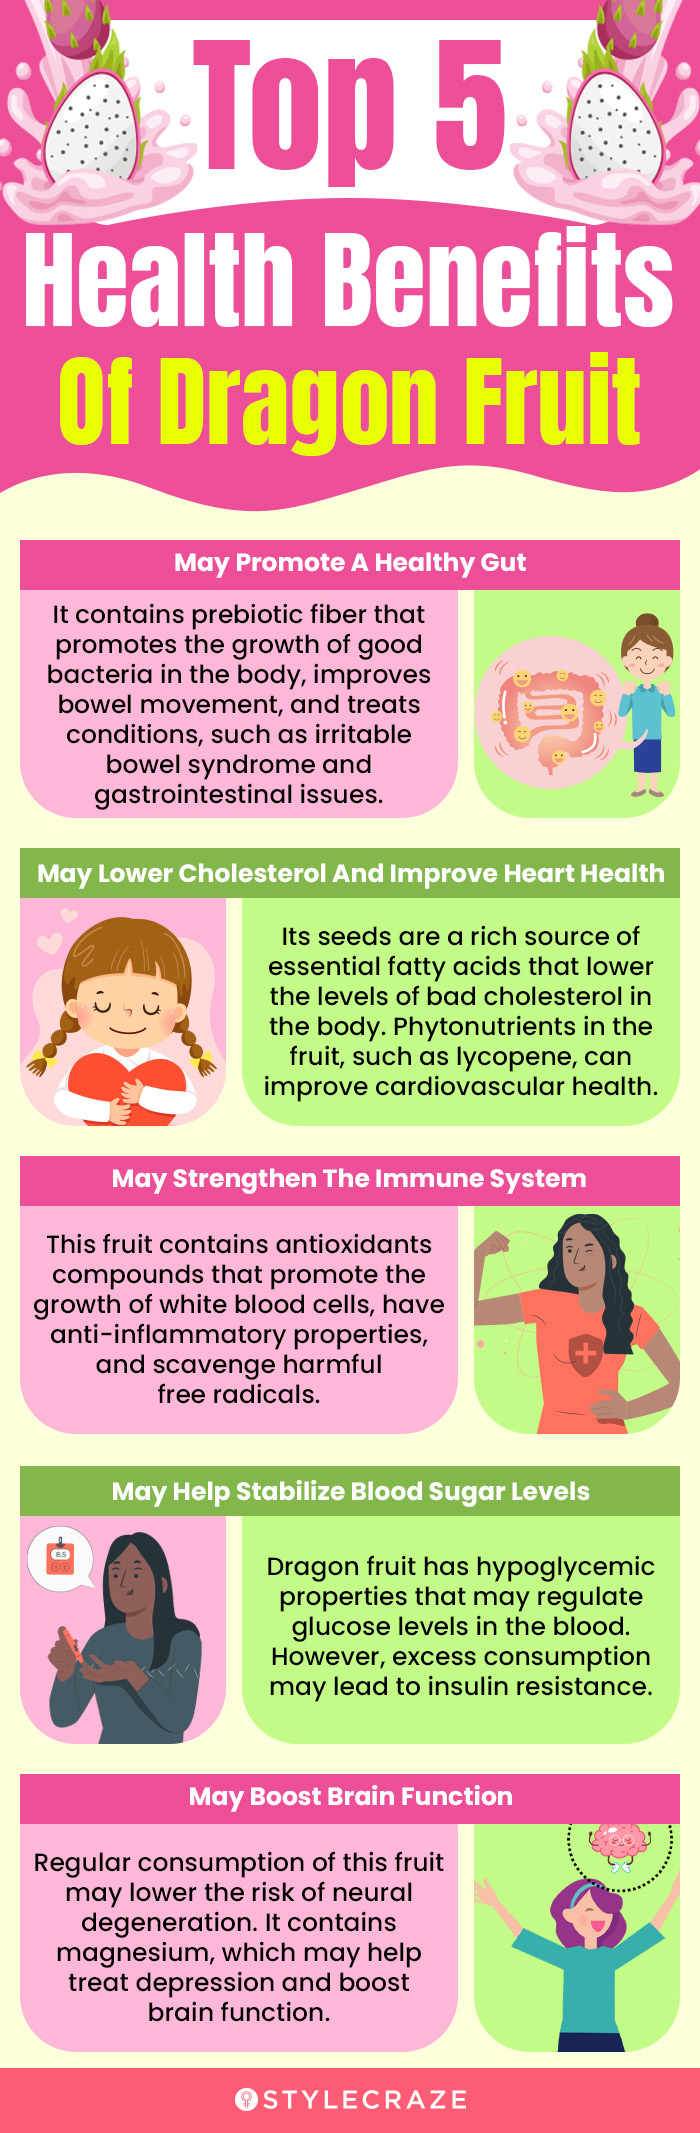 top 5 health benefits of dragon fruit (infographic)